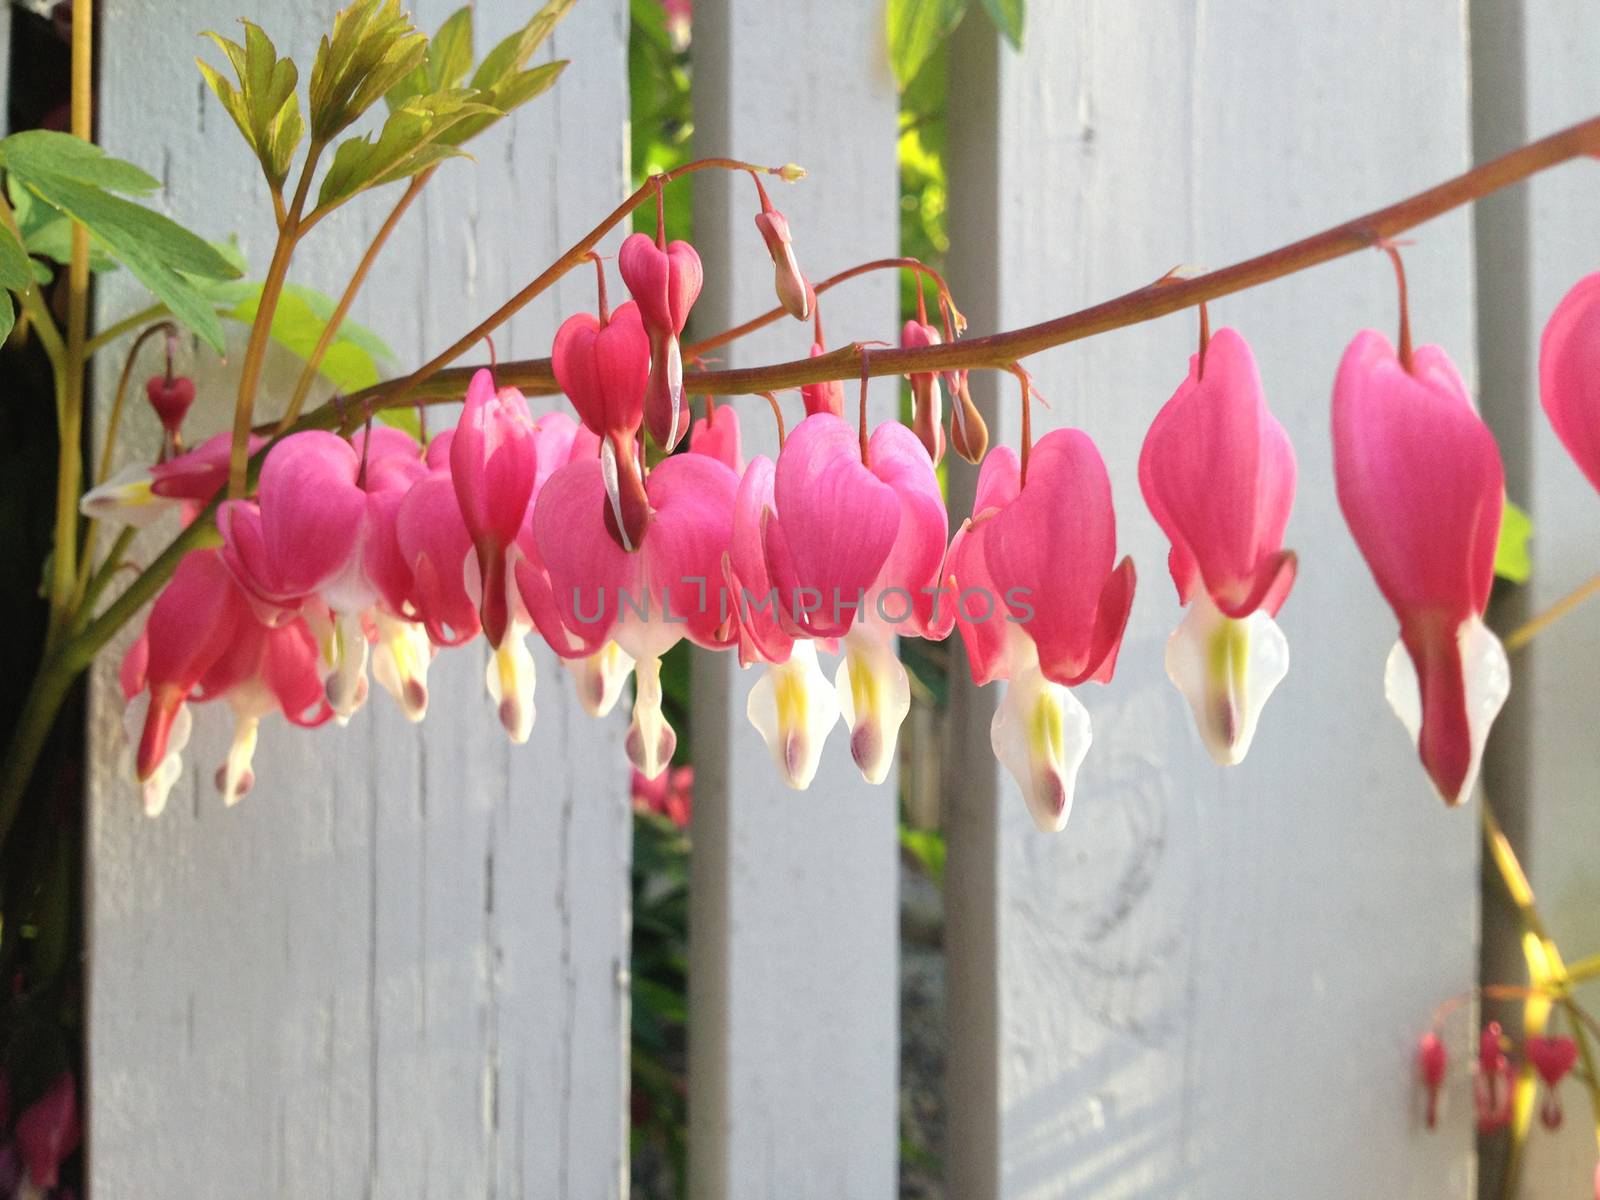 Pink and white bleeding heart flowers dangling in a row on a green branch